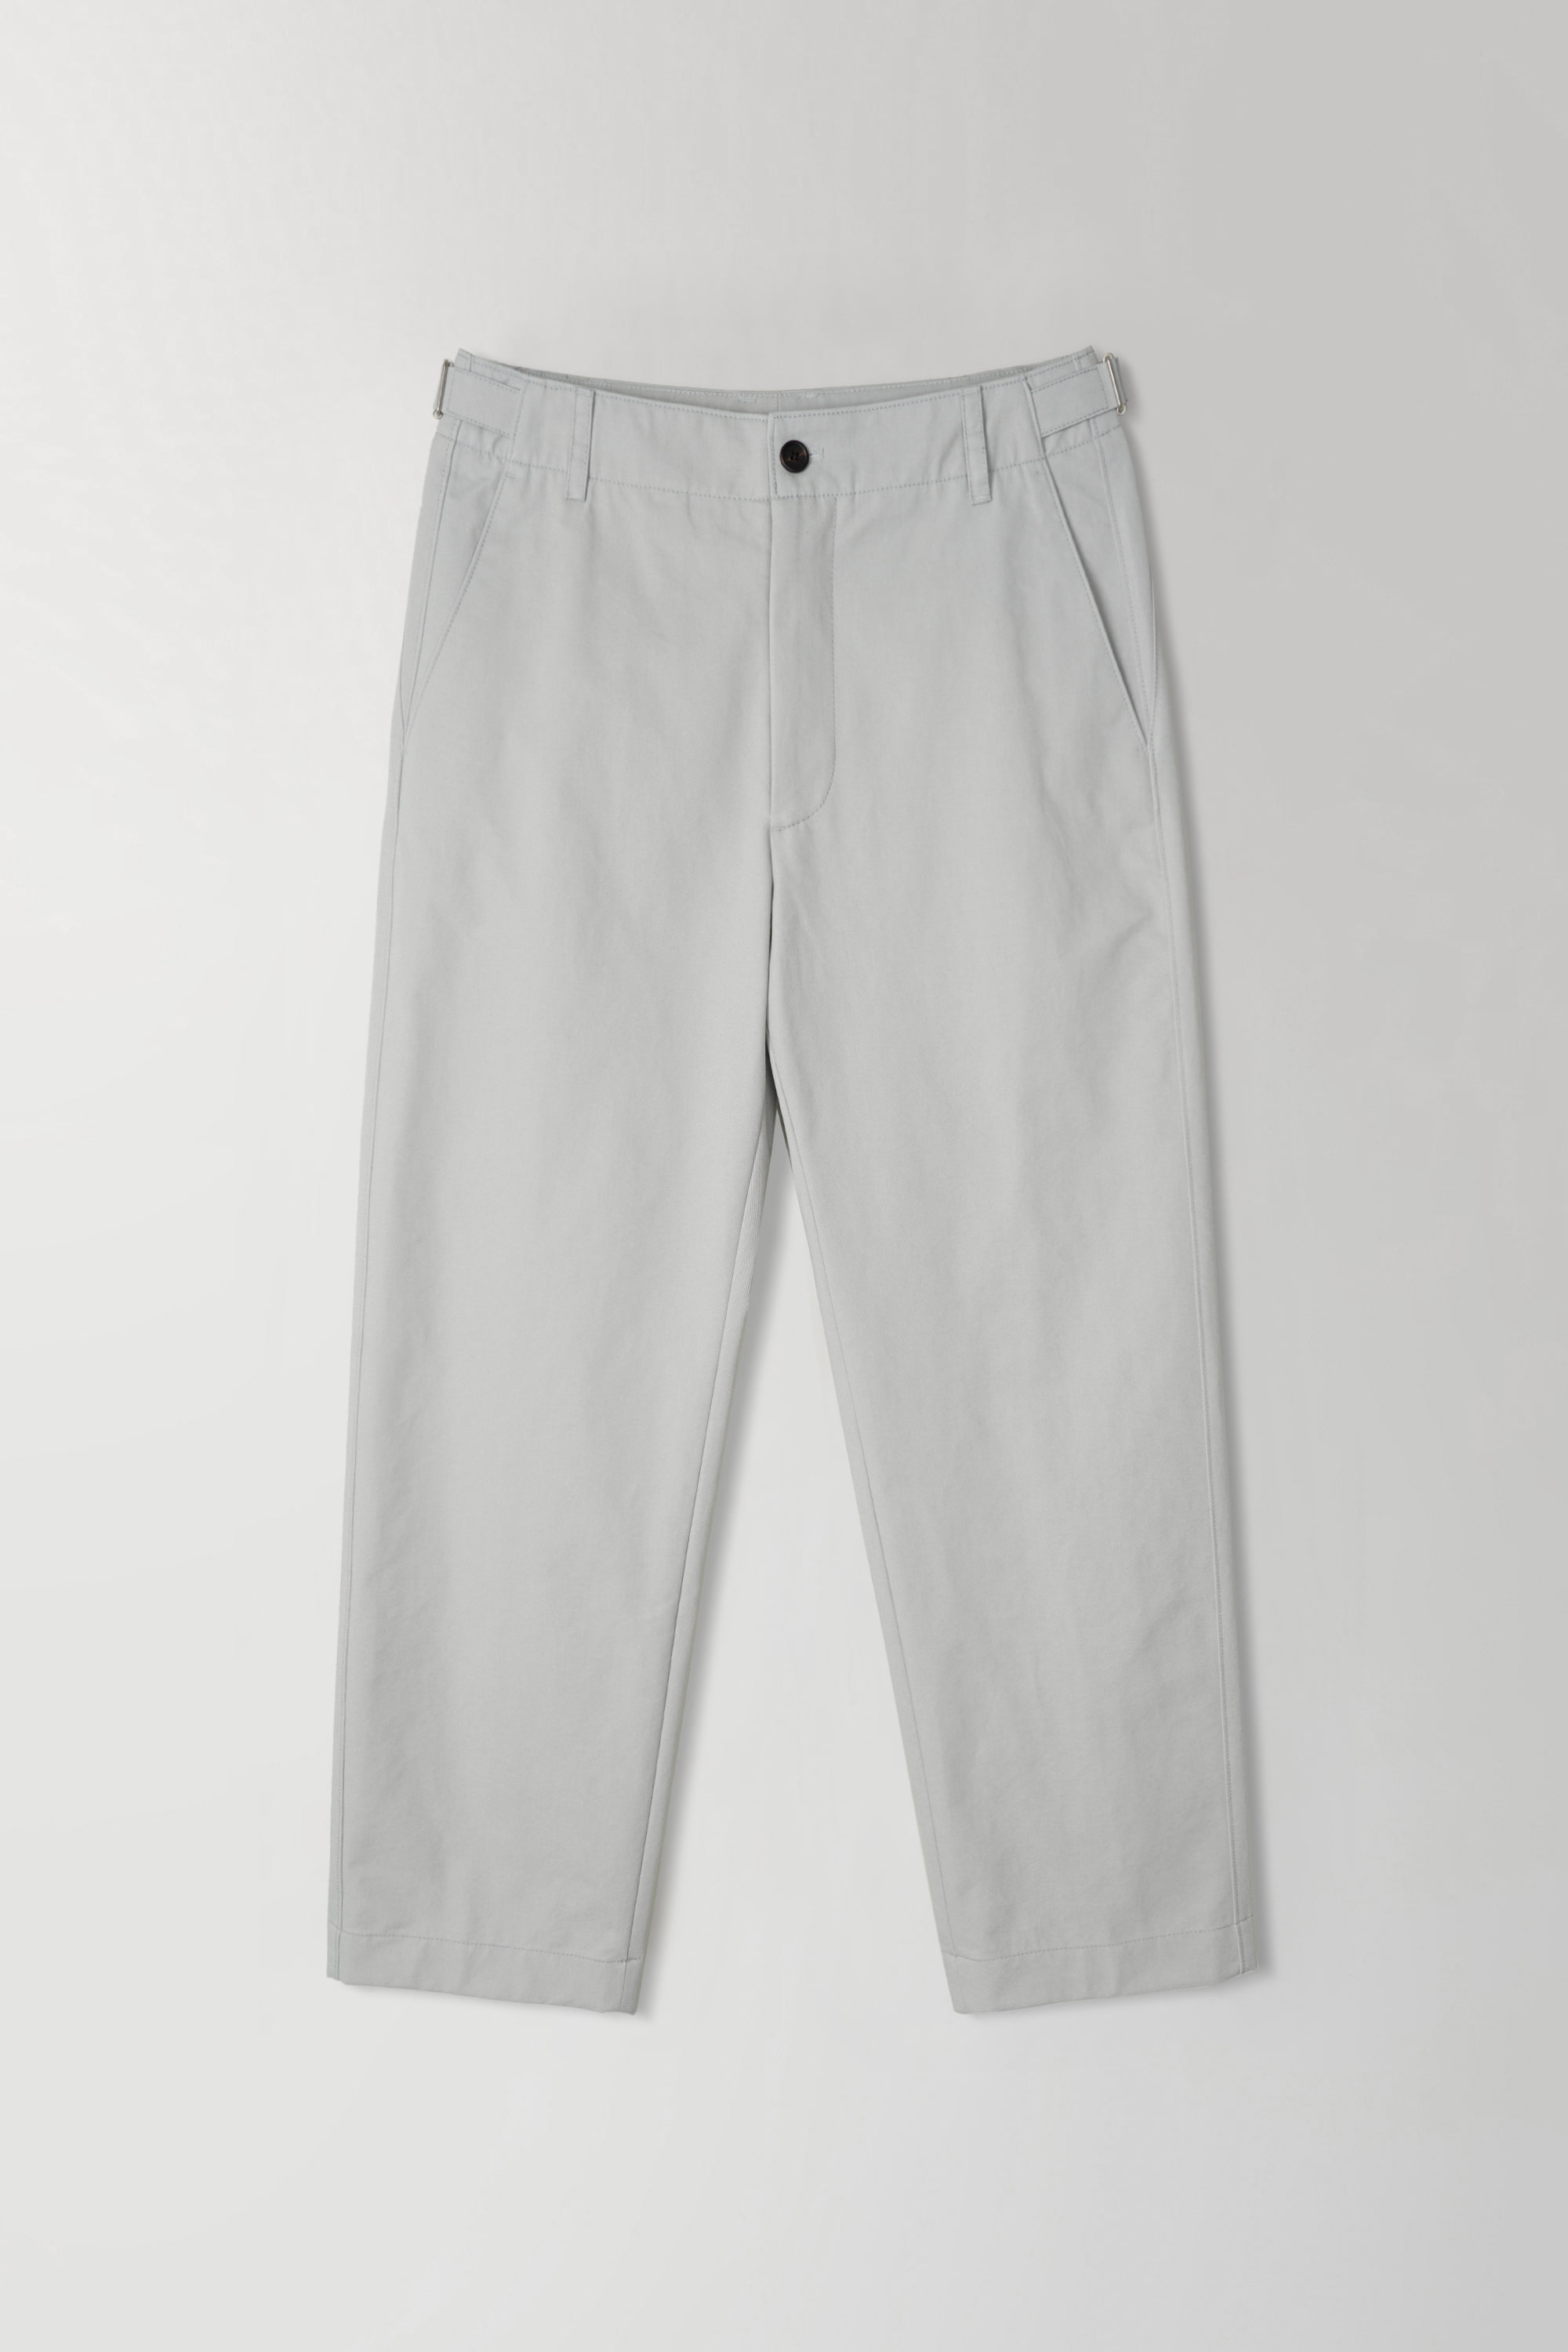 OFFICER CHINO PANTS (TYPE2) - SILVER GREY